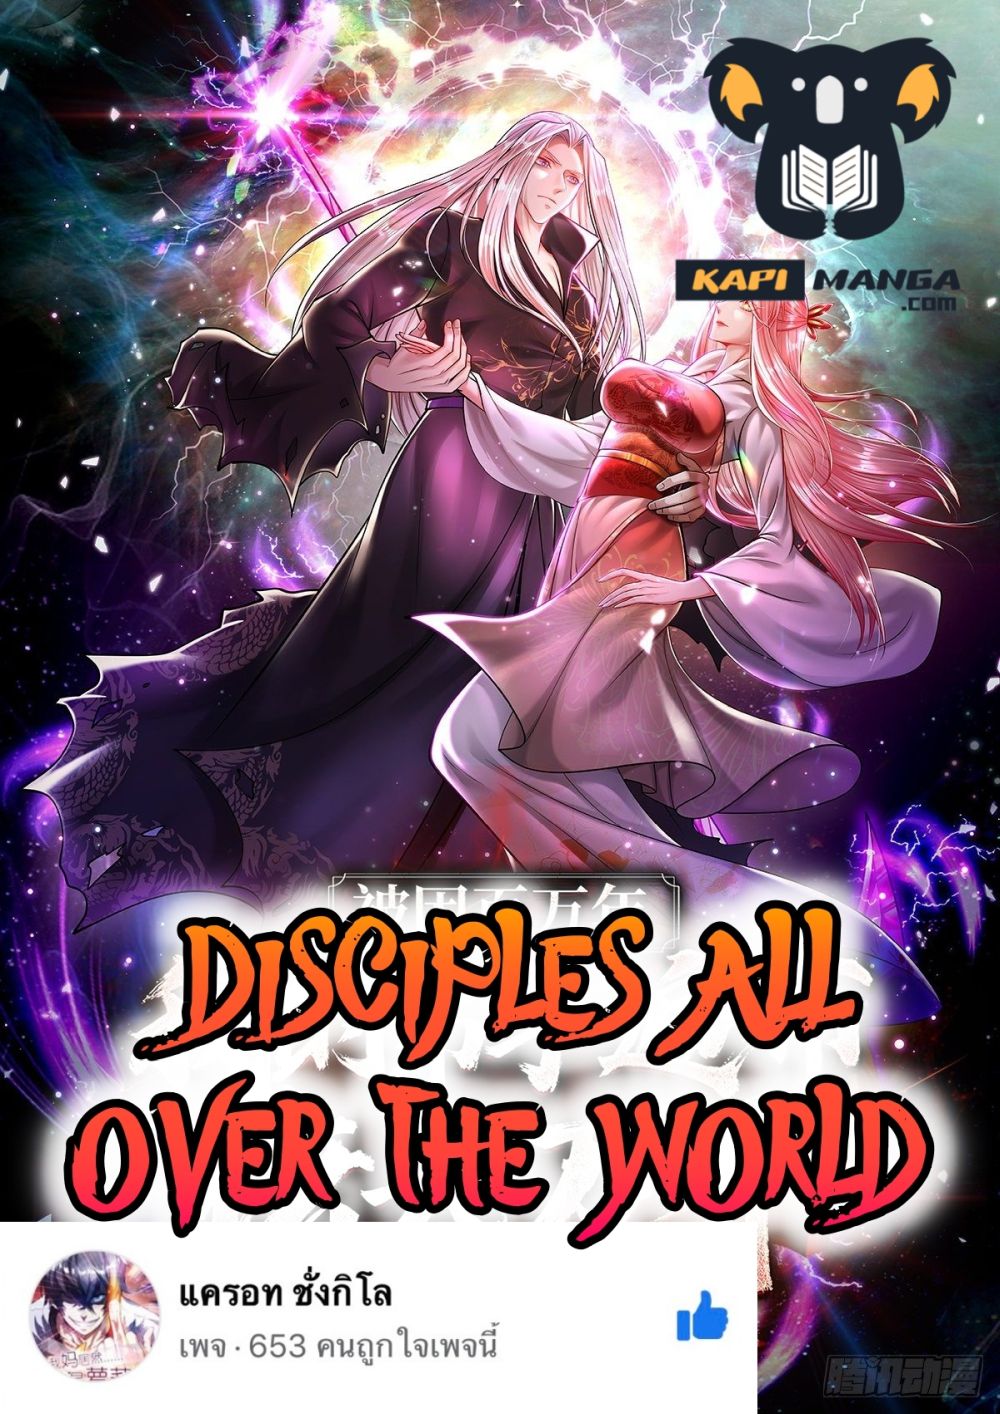 Disciples All Over the World à¸à¸­à¸à¸à¸µà¹ 50 (1)